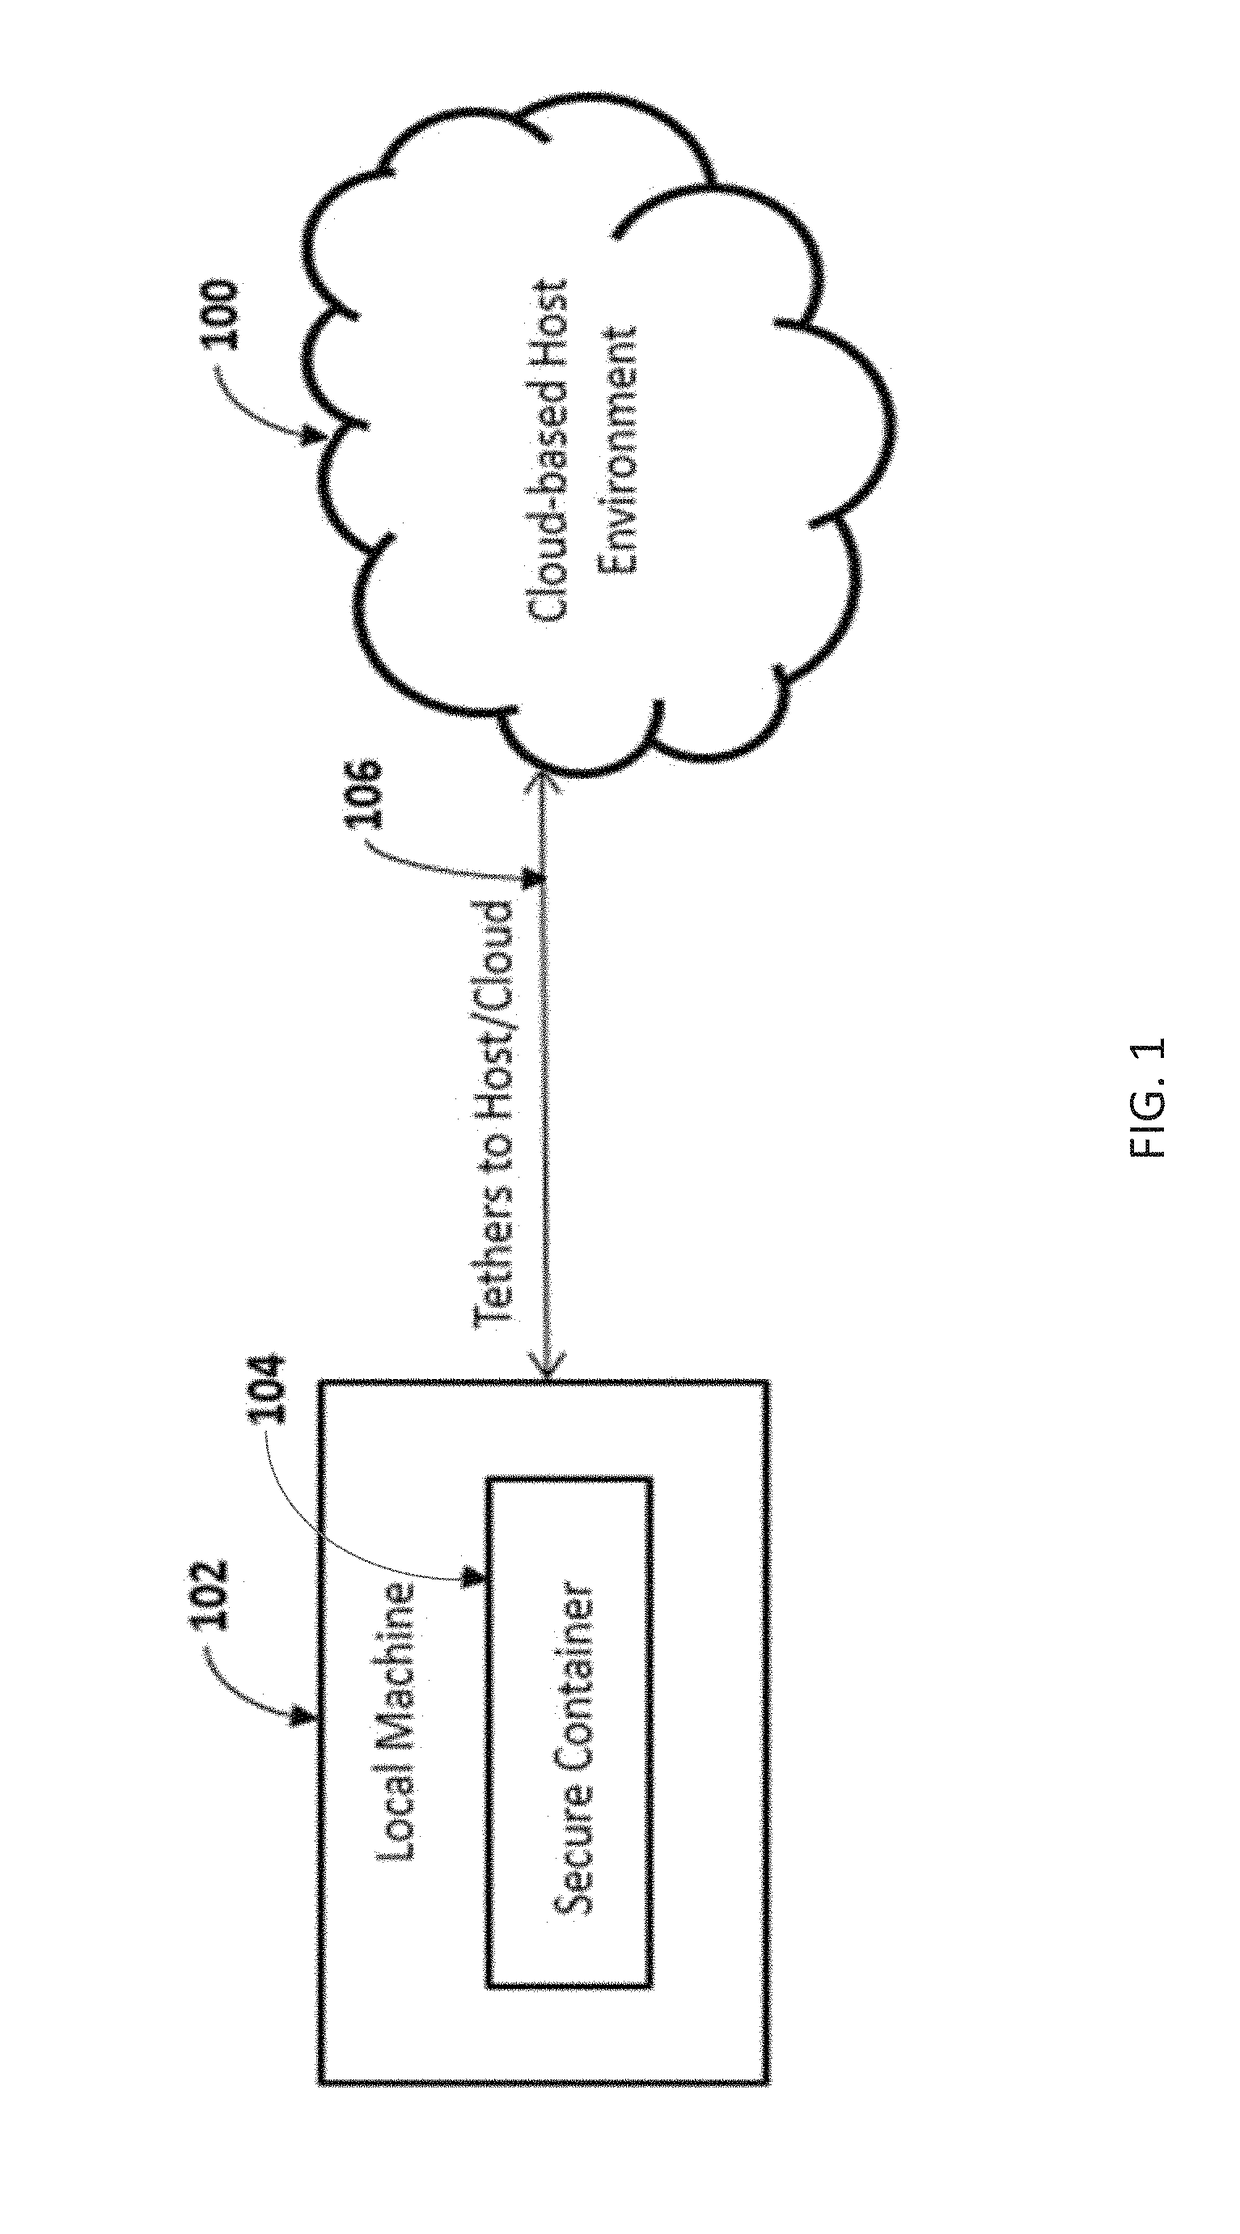 Methods and systems for operating secure digital management aware applications